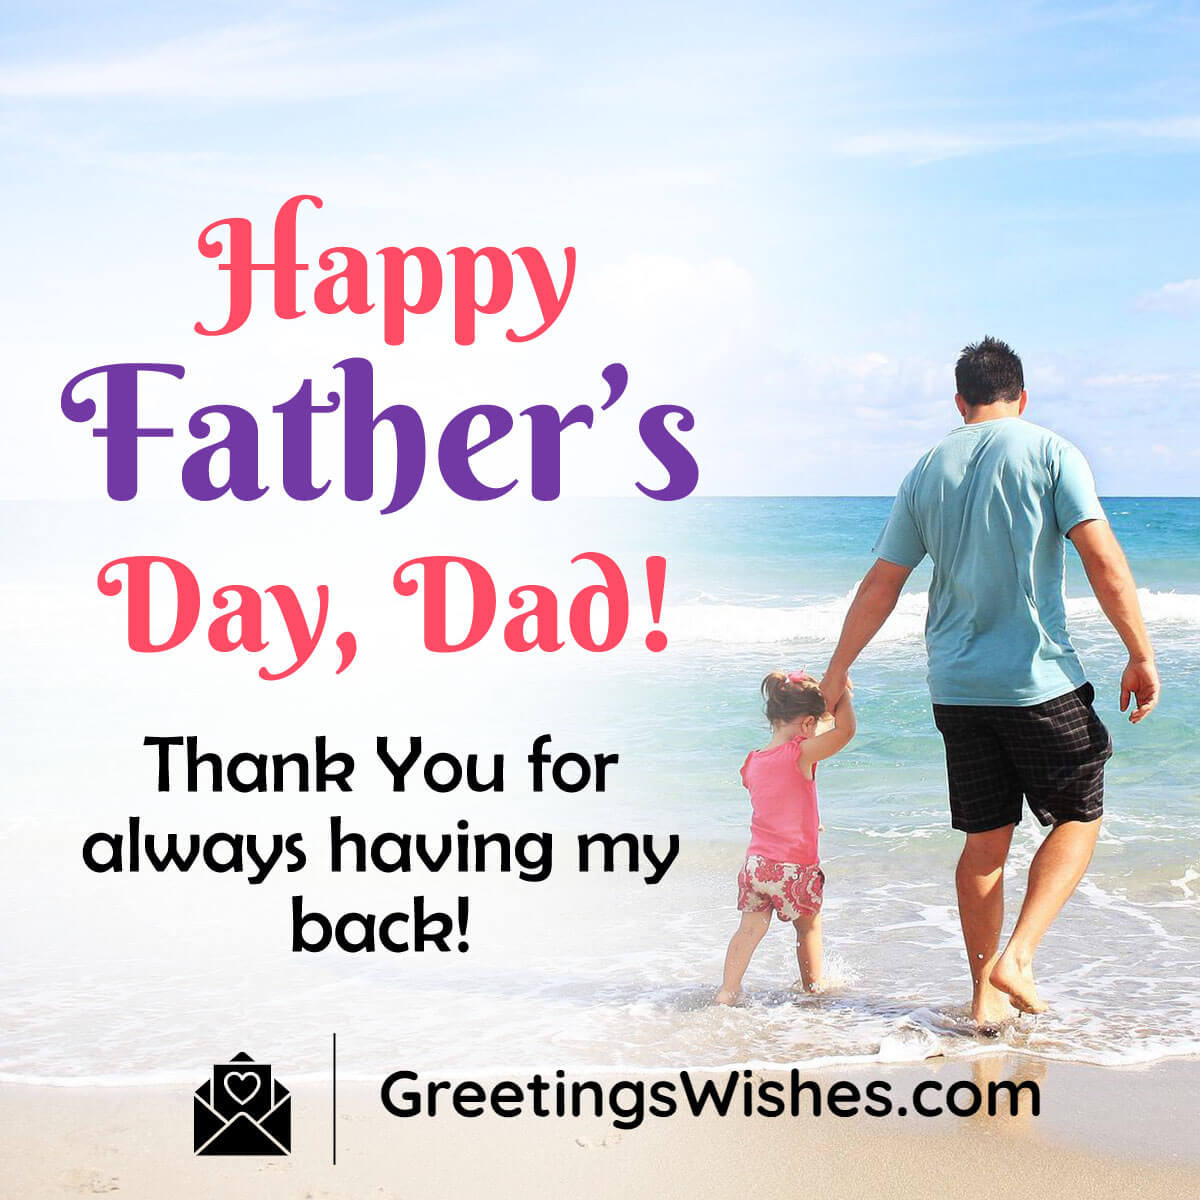 Happy Father’s Day Wishes Messages ( 18th June ) - Greetings Wishes